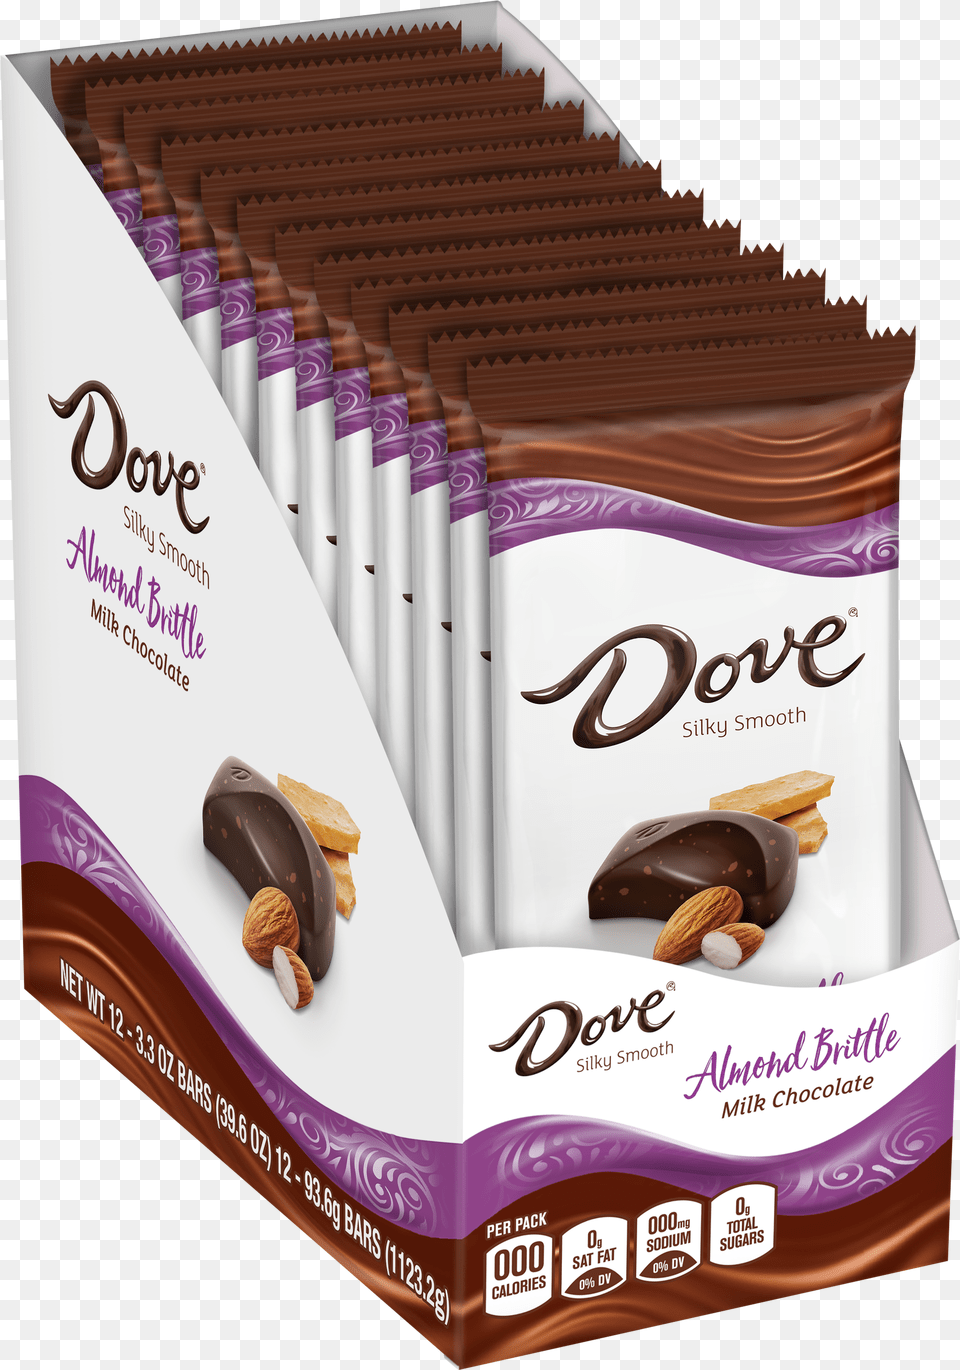 Dove Almond Brittle Chocolate Bar Chocolate Png Image